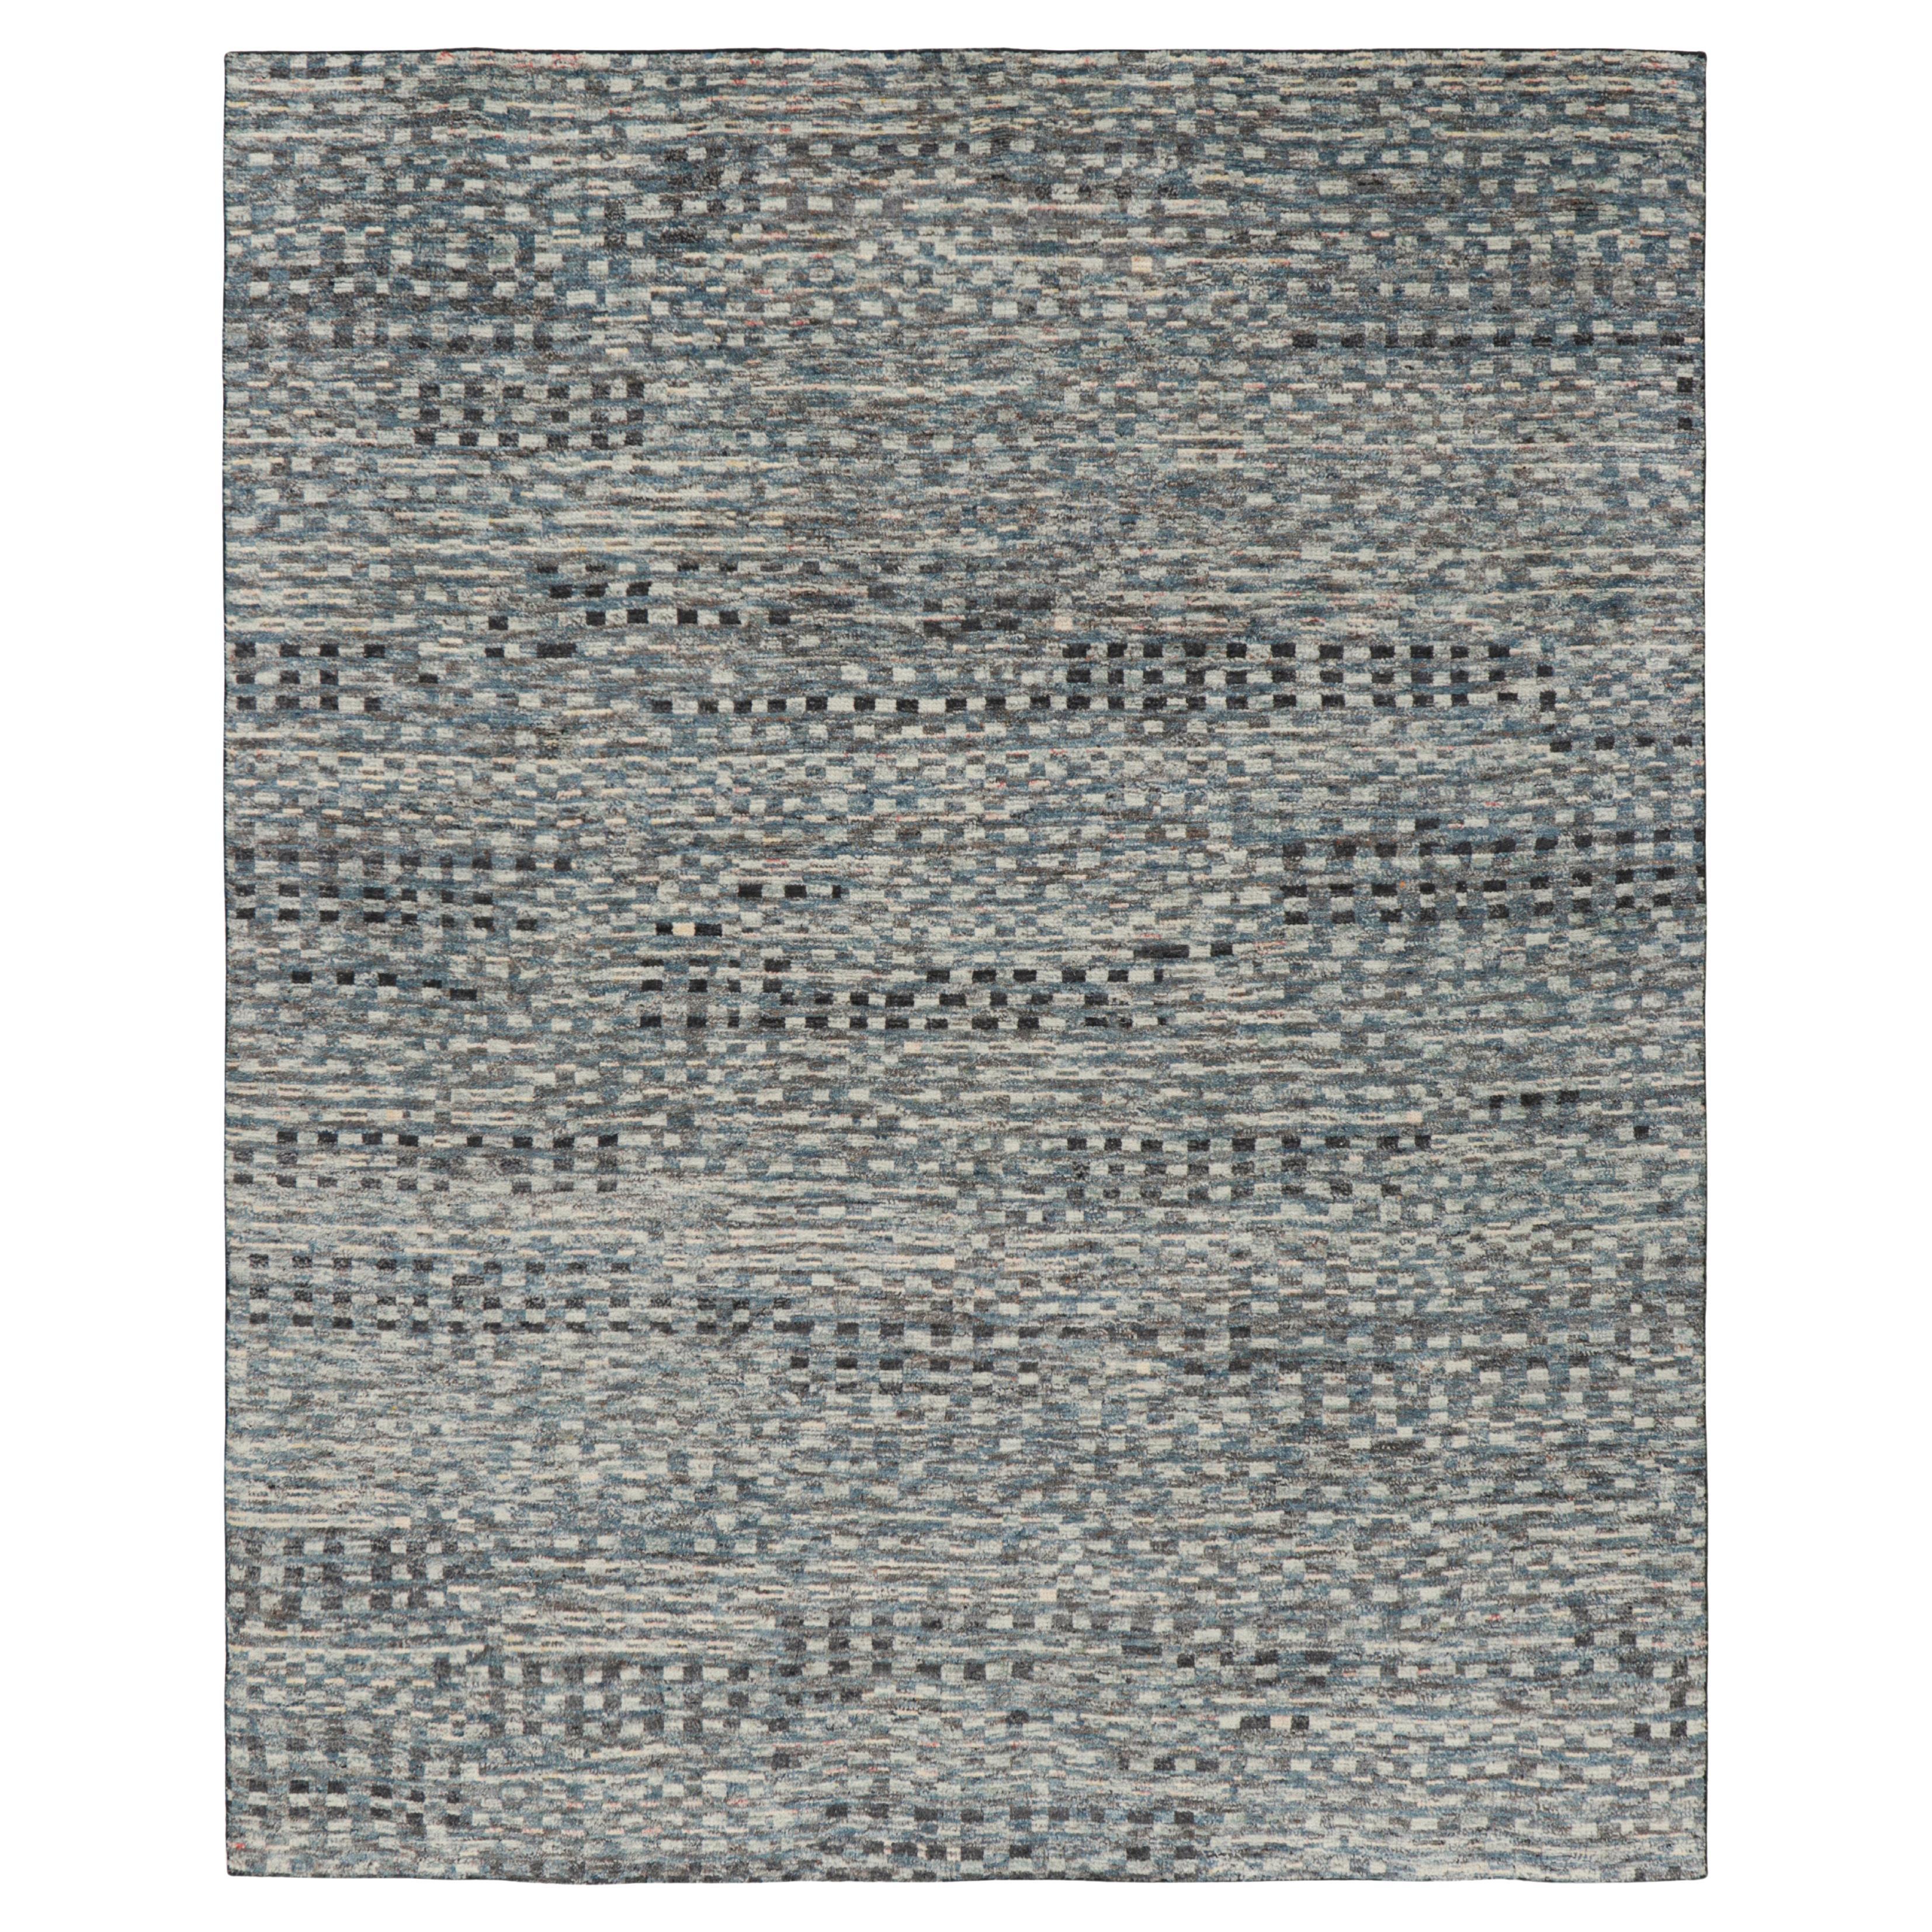 Rug & Kilim’s Moroccan Style Rug in Blue, Gray and White Geometric Patterns For Sale